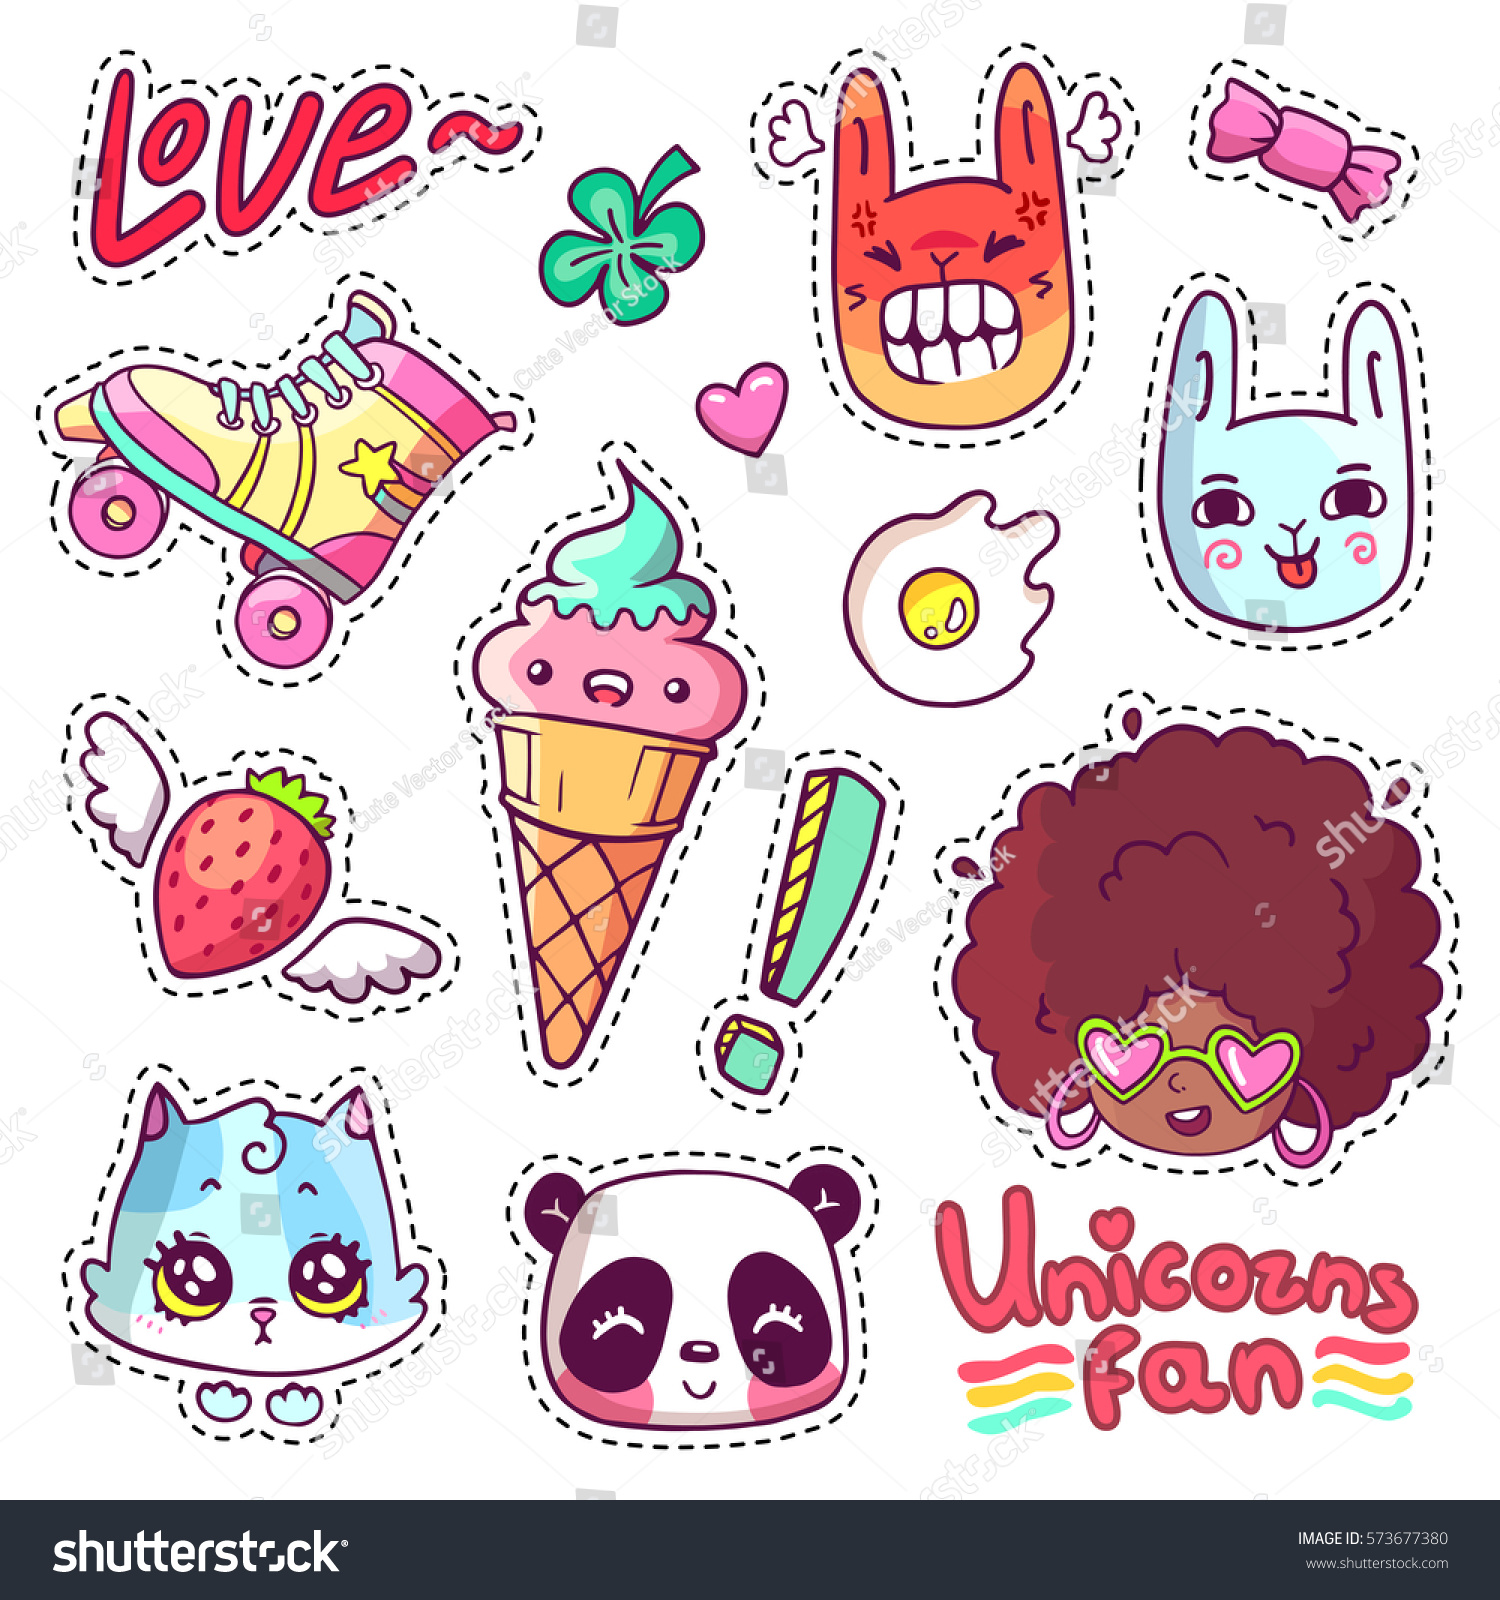 Colorful vector patch badges with animals, characters and things. Hand-drawn stickers, pins in cartoon 80s-90s comics style. Set with african woman, angry bunny, adorable kitten, etc. Part 13 #573677380